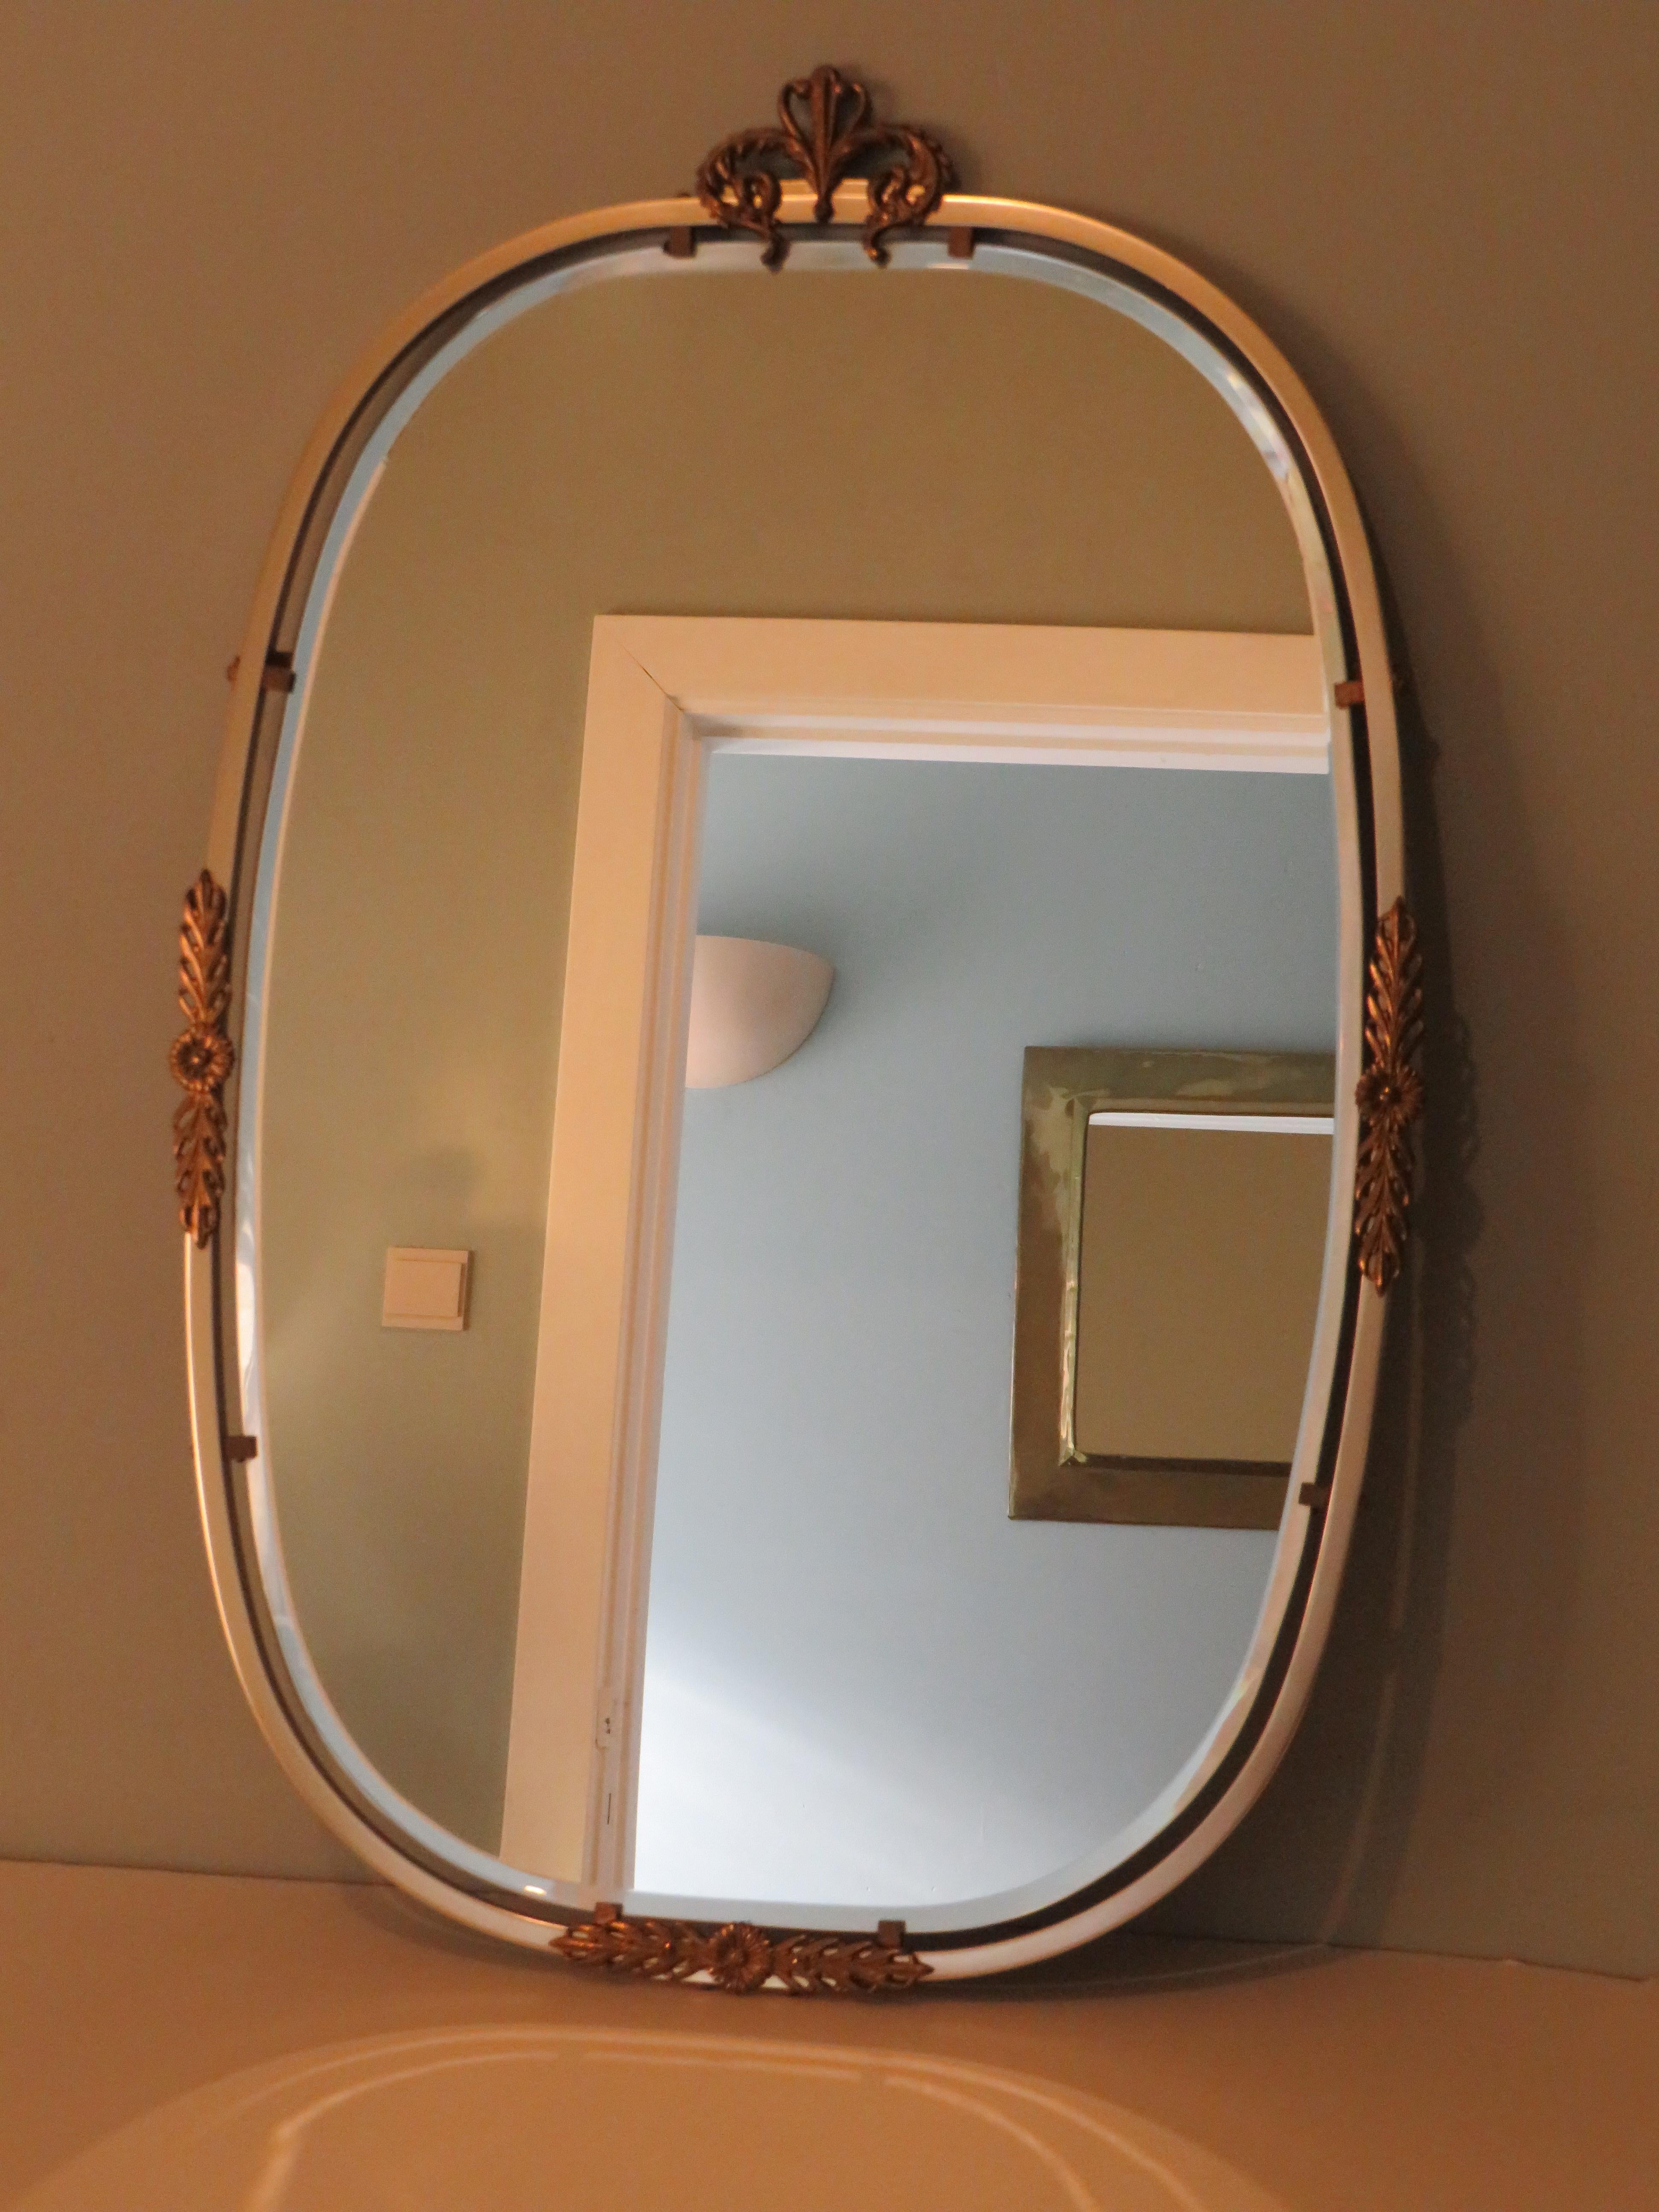 The mirror has a polished edge and is held by means of metal clips in a nickel-plated metal edge, which is decorated with brass ornaments. On both sides and at the bottom is a flower ornament and at the top a heart-shaped decoration.
The mirror is